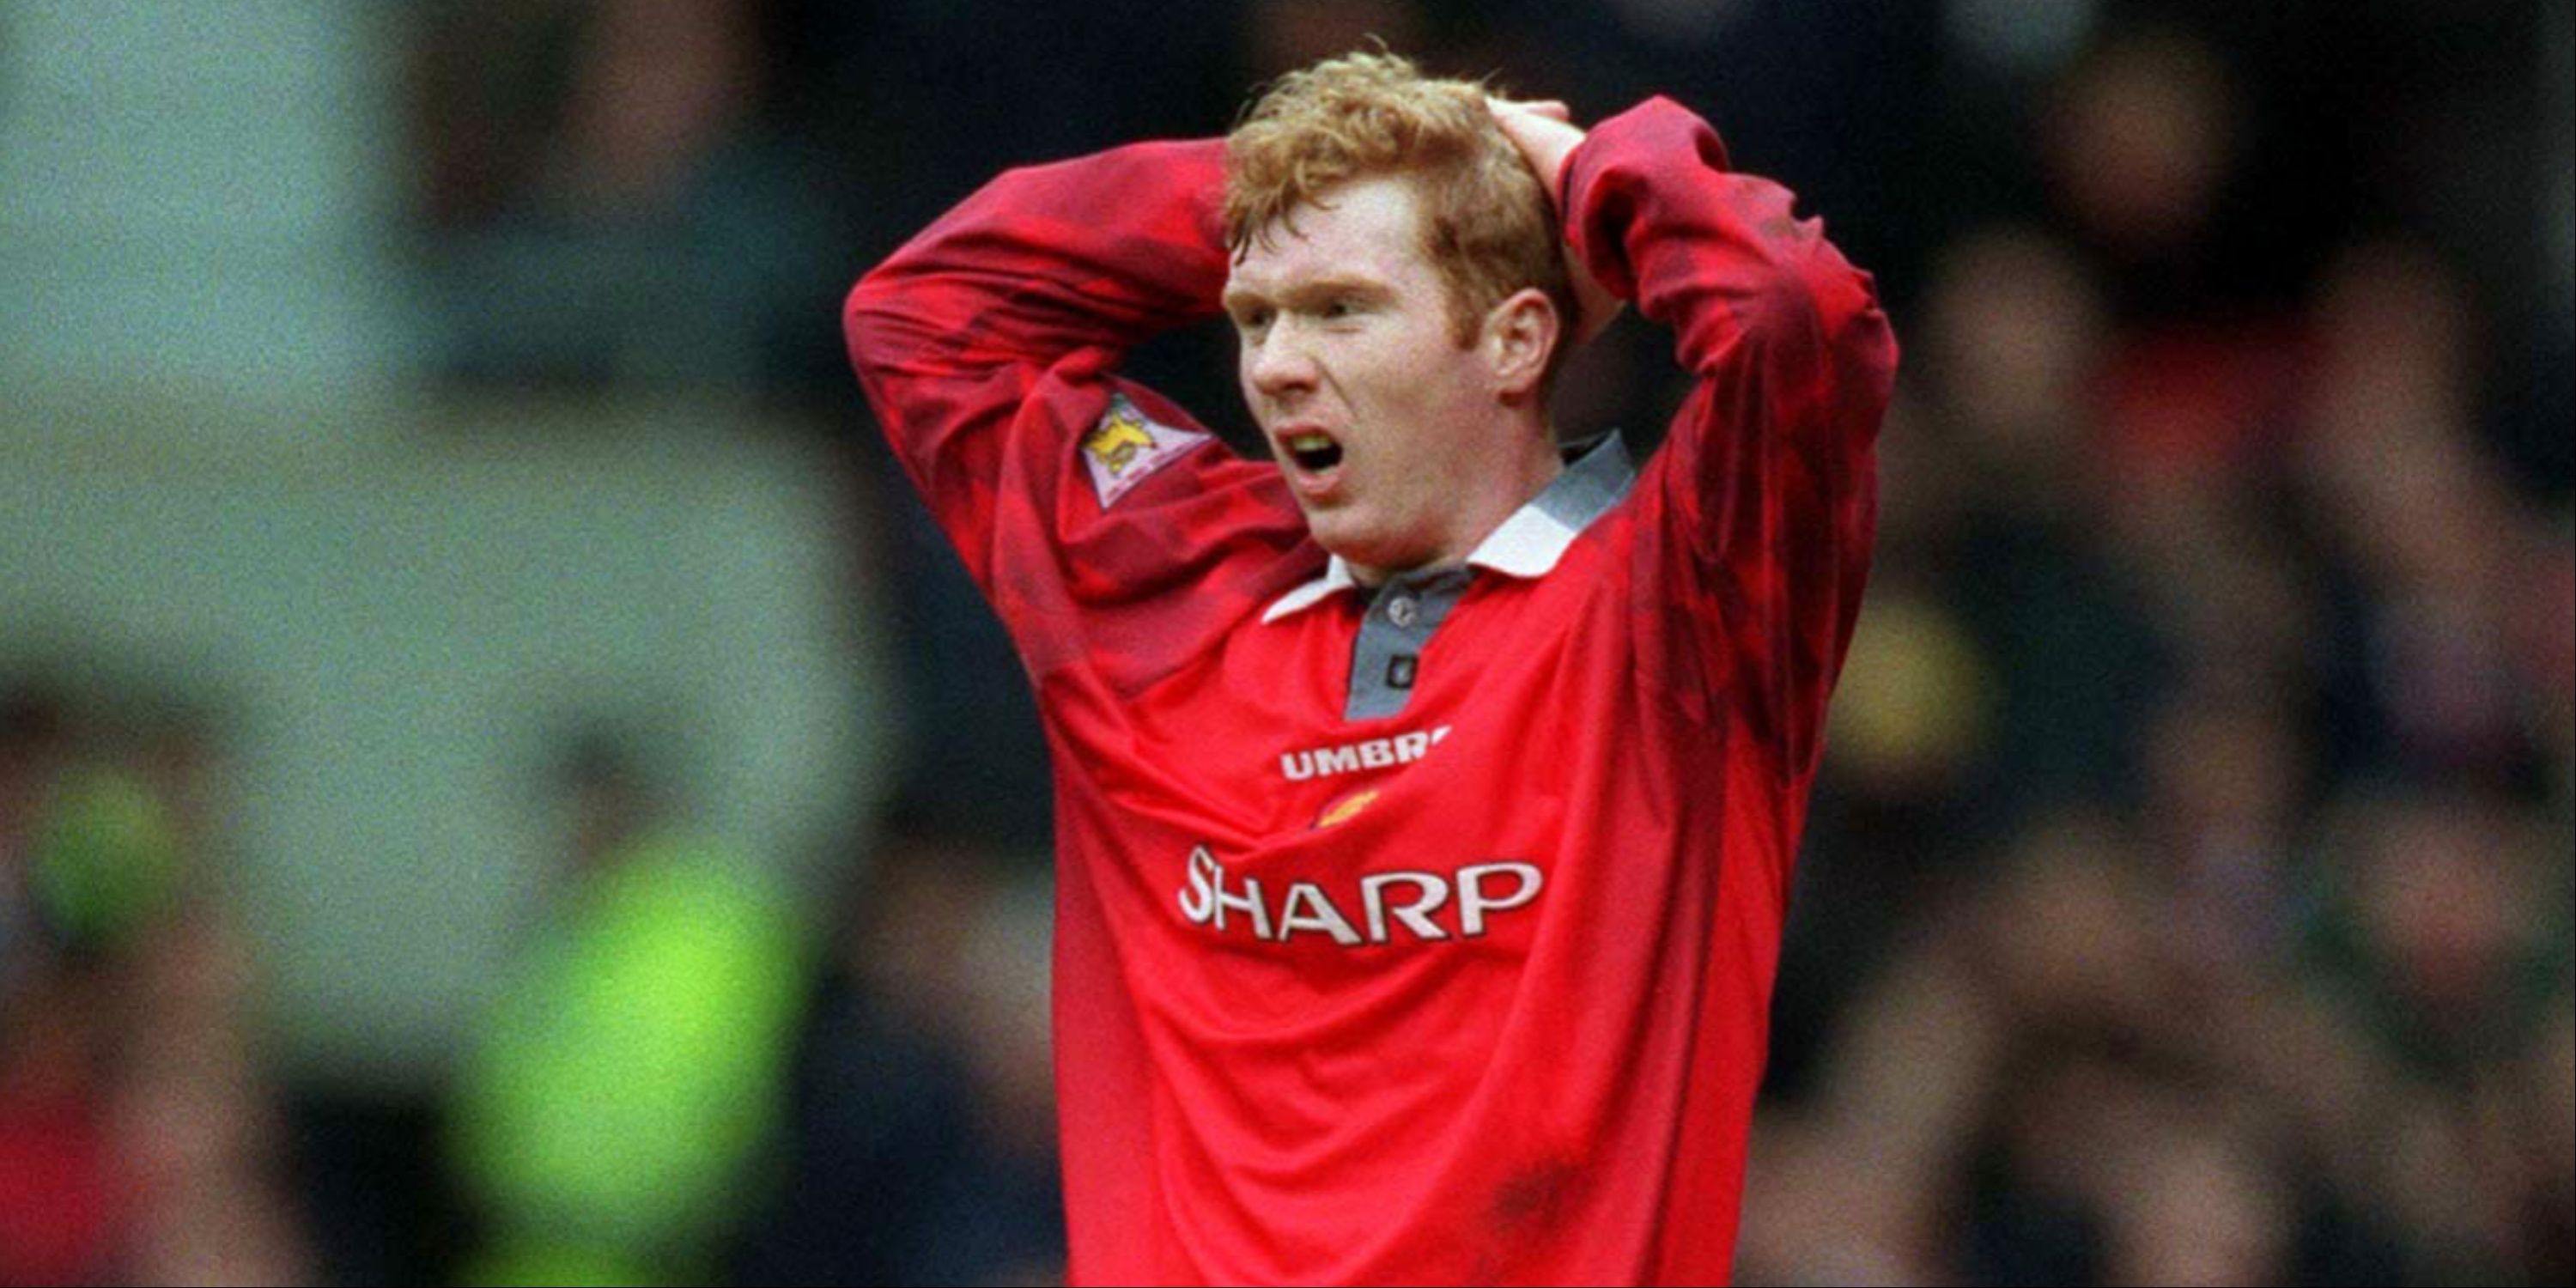 Manchester United's Paul Scholes puts his hands to his head.